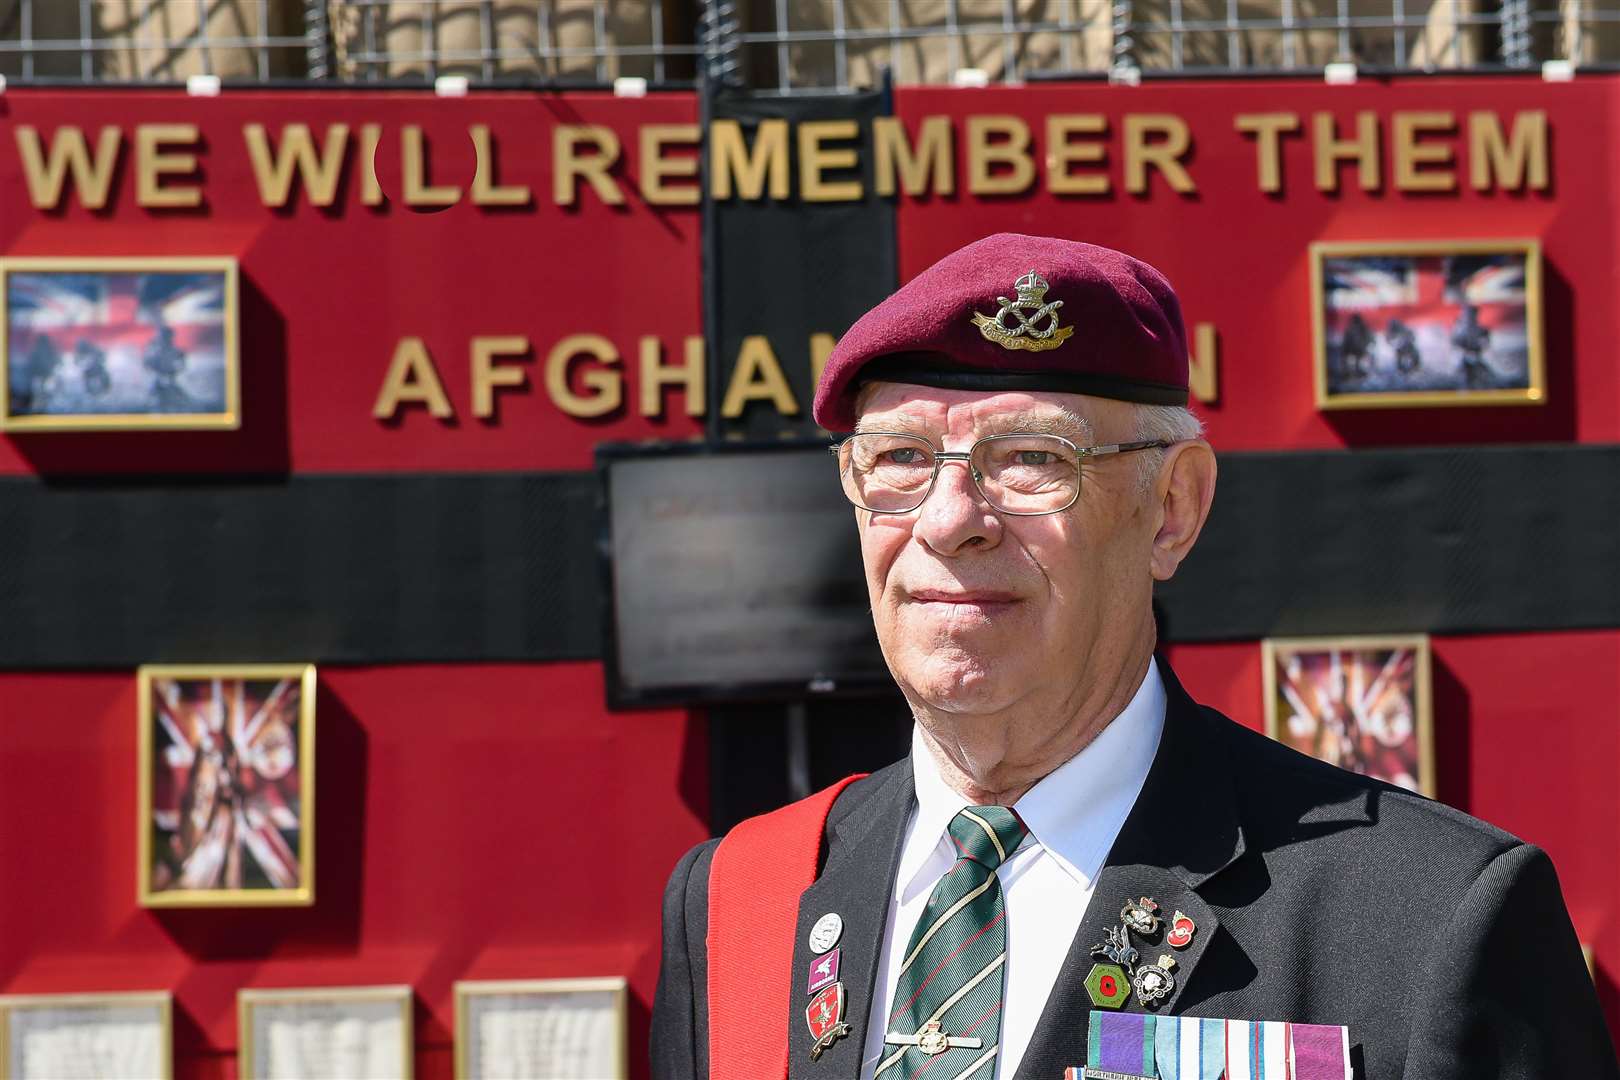 Veteran Frank Thompson from Dove at Armed Forces Day last year